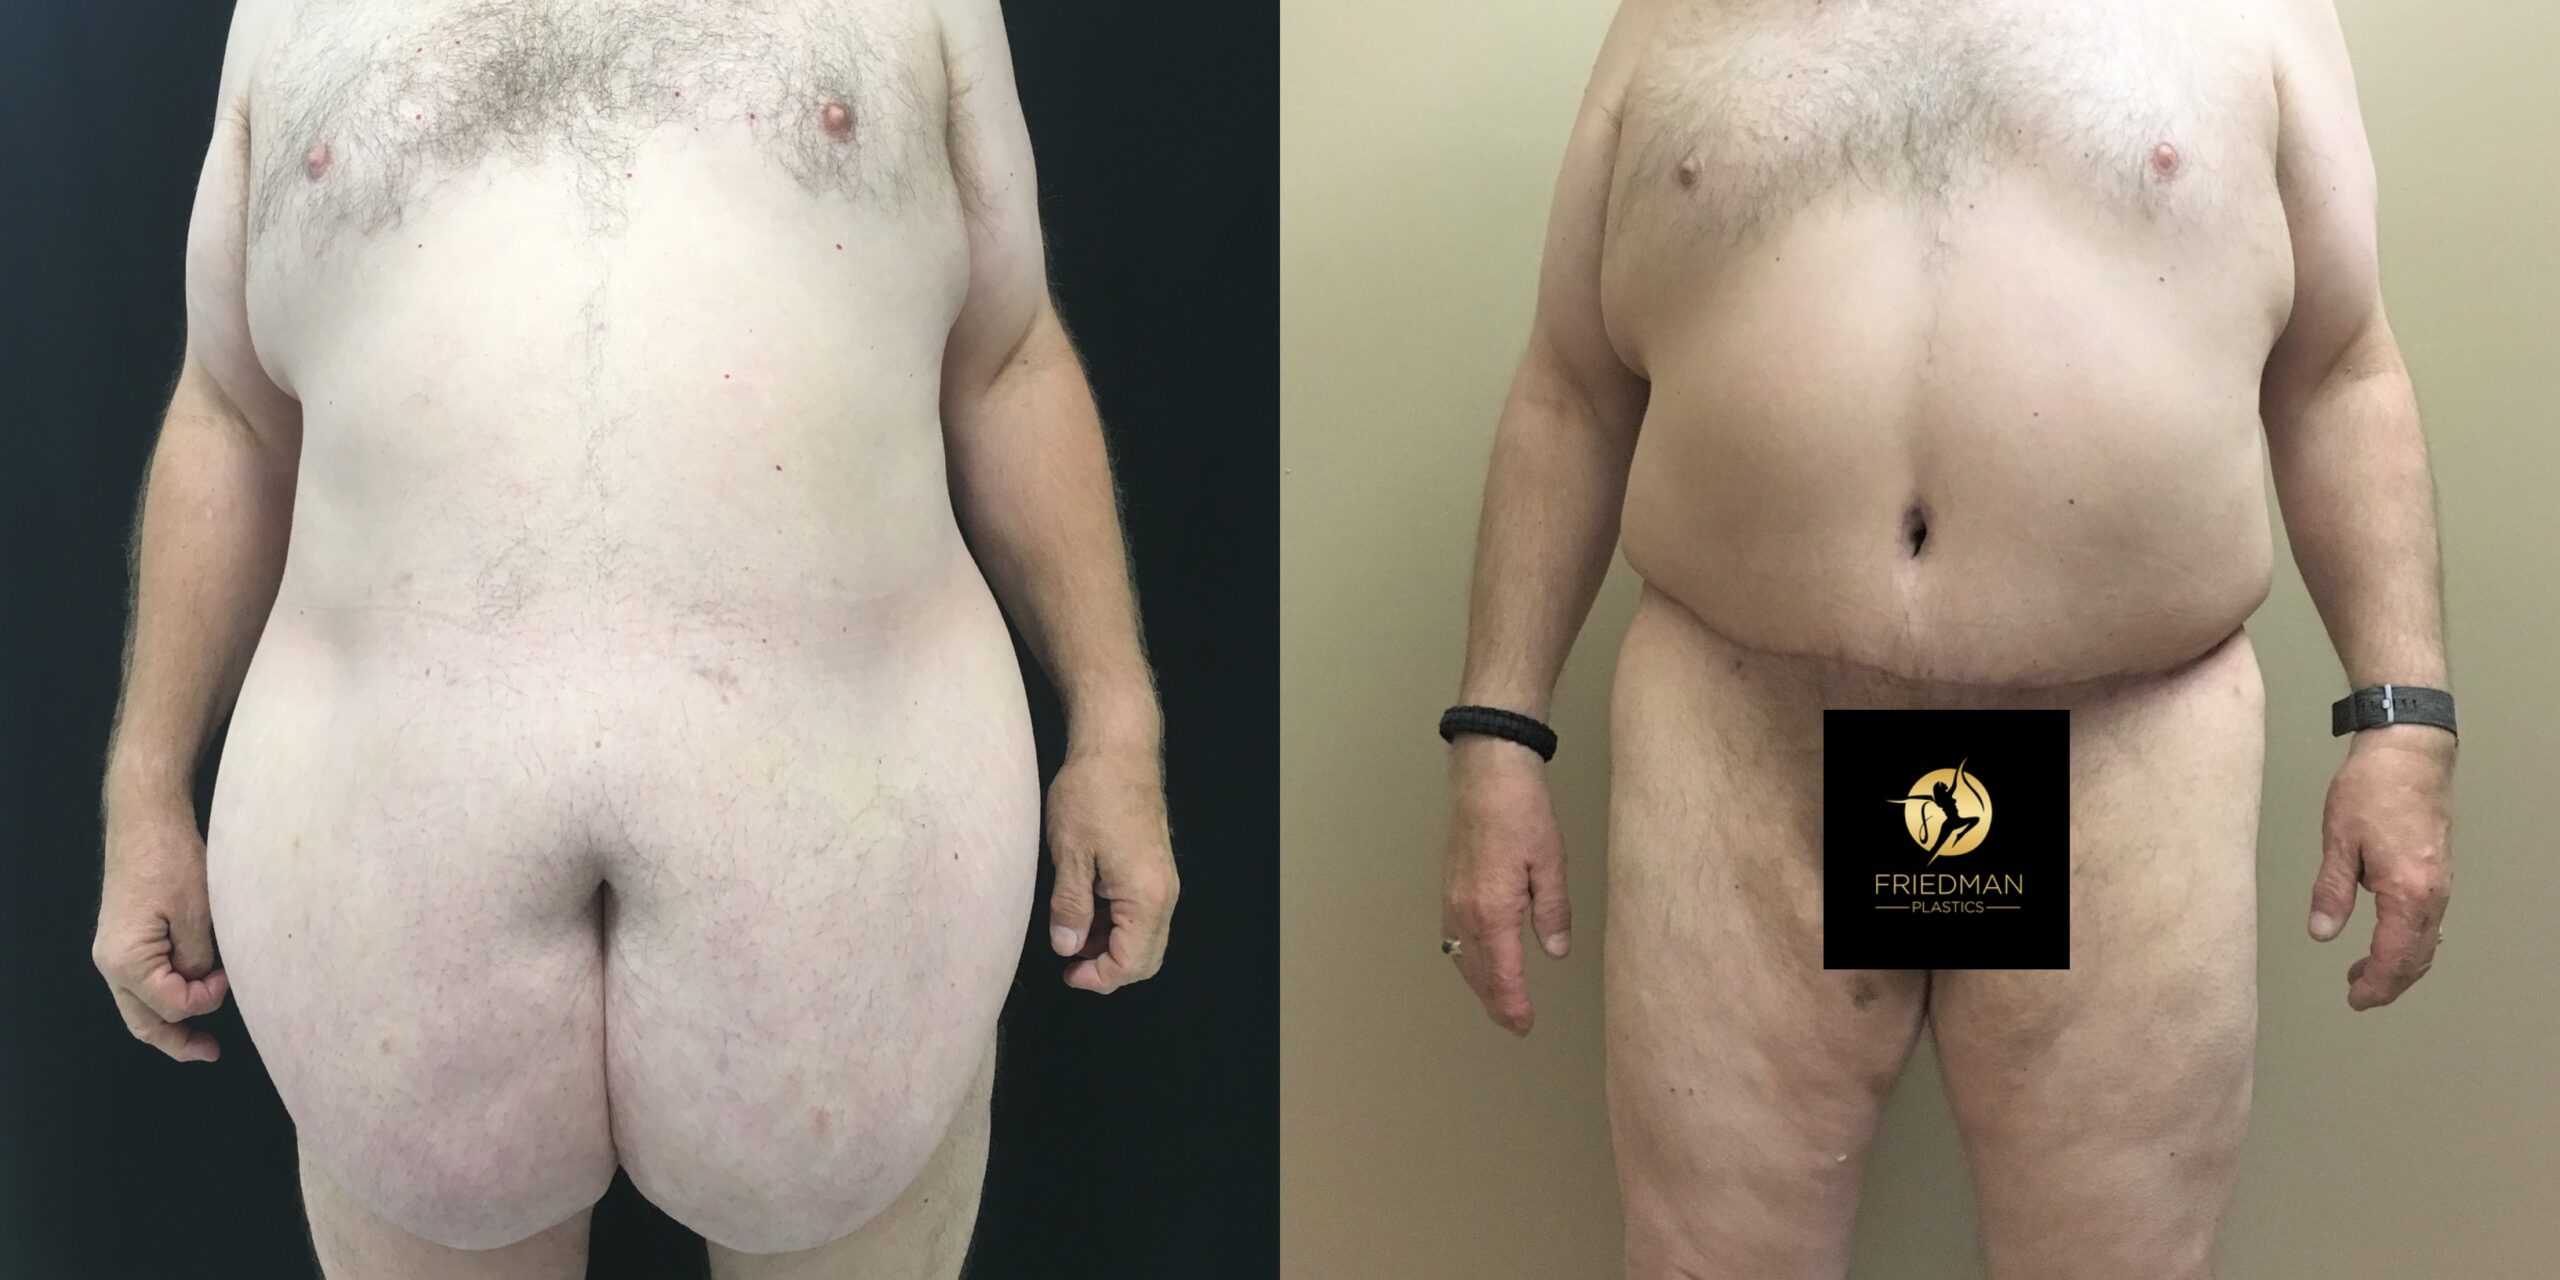 Abdominoplasty with Panniculectomy and Posterior Lower Body LiftLower Body Lift